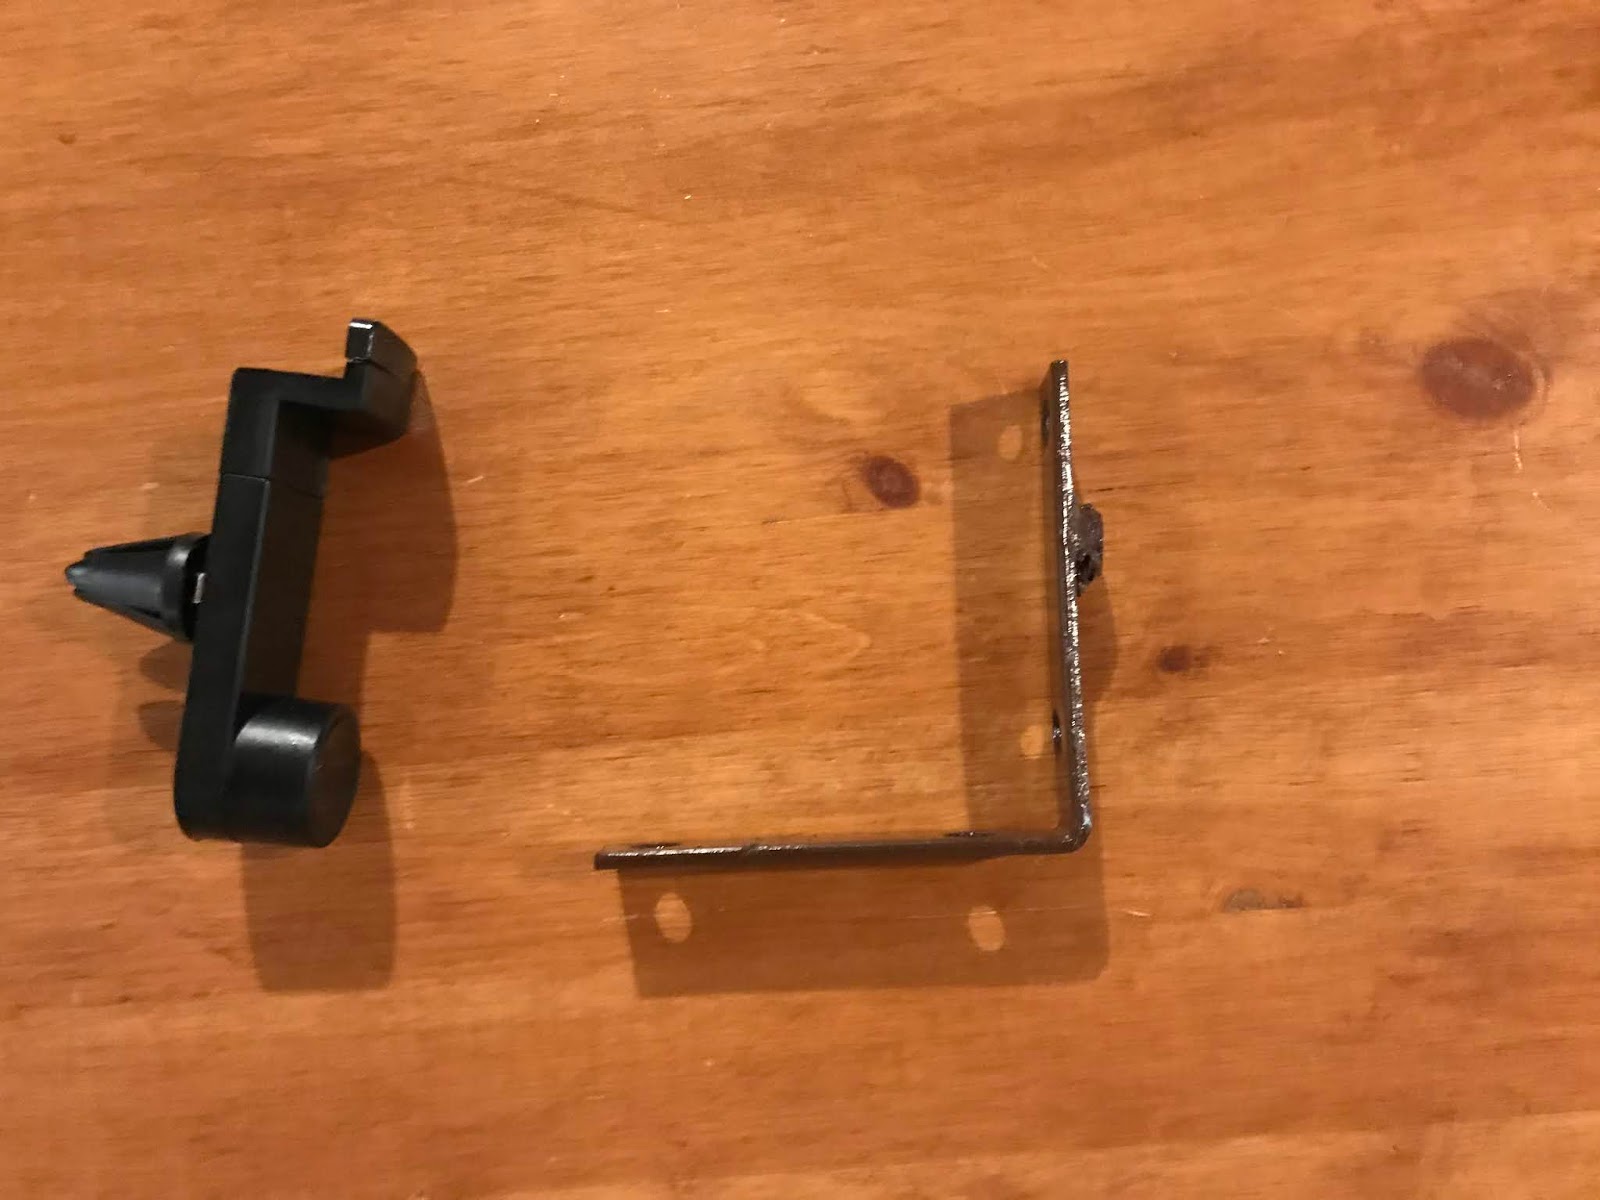 Building a $5 Smart Phone Tripod Mount | Small Workshop Chronicles